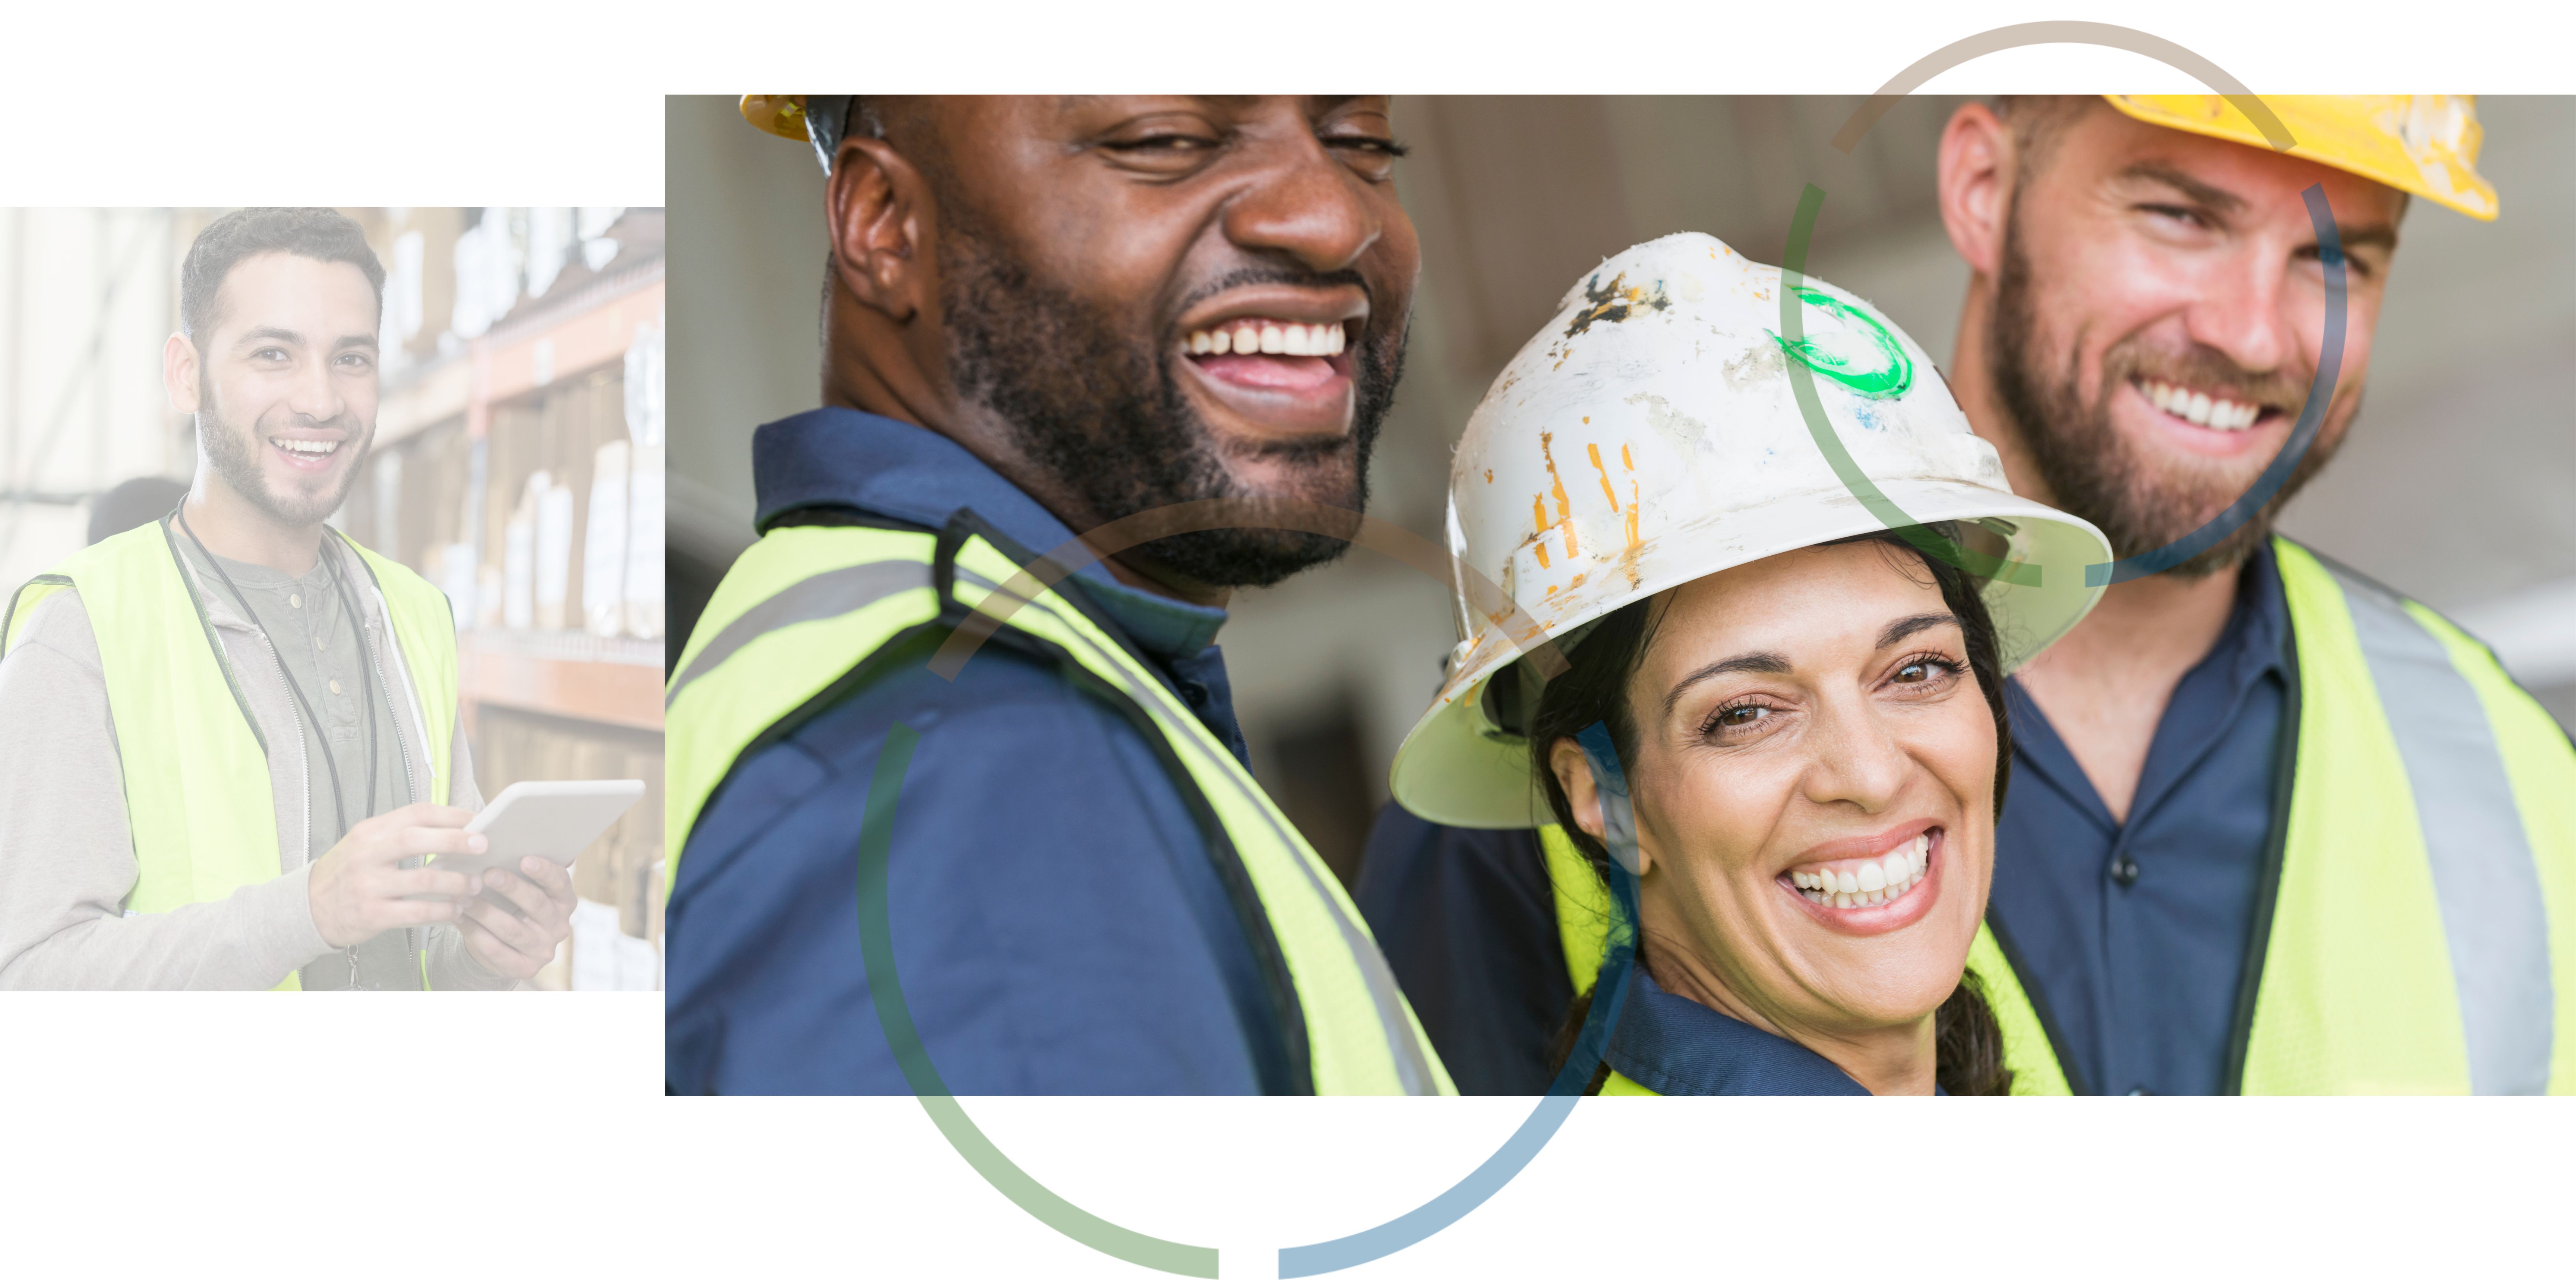 A photo of a man smiling in a warehouse next to a photo of people wearing hard hats and smiling.